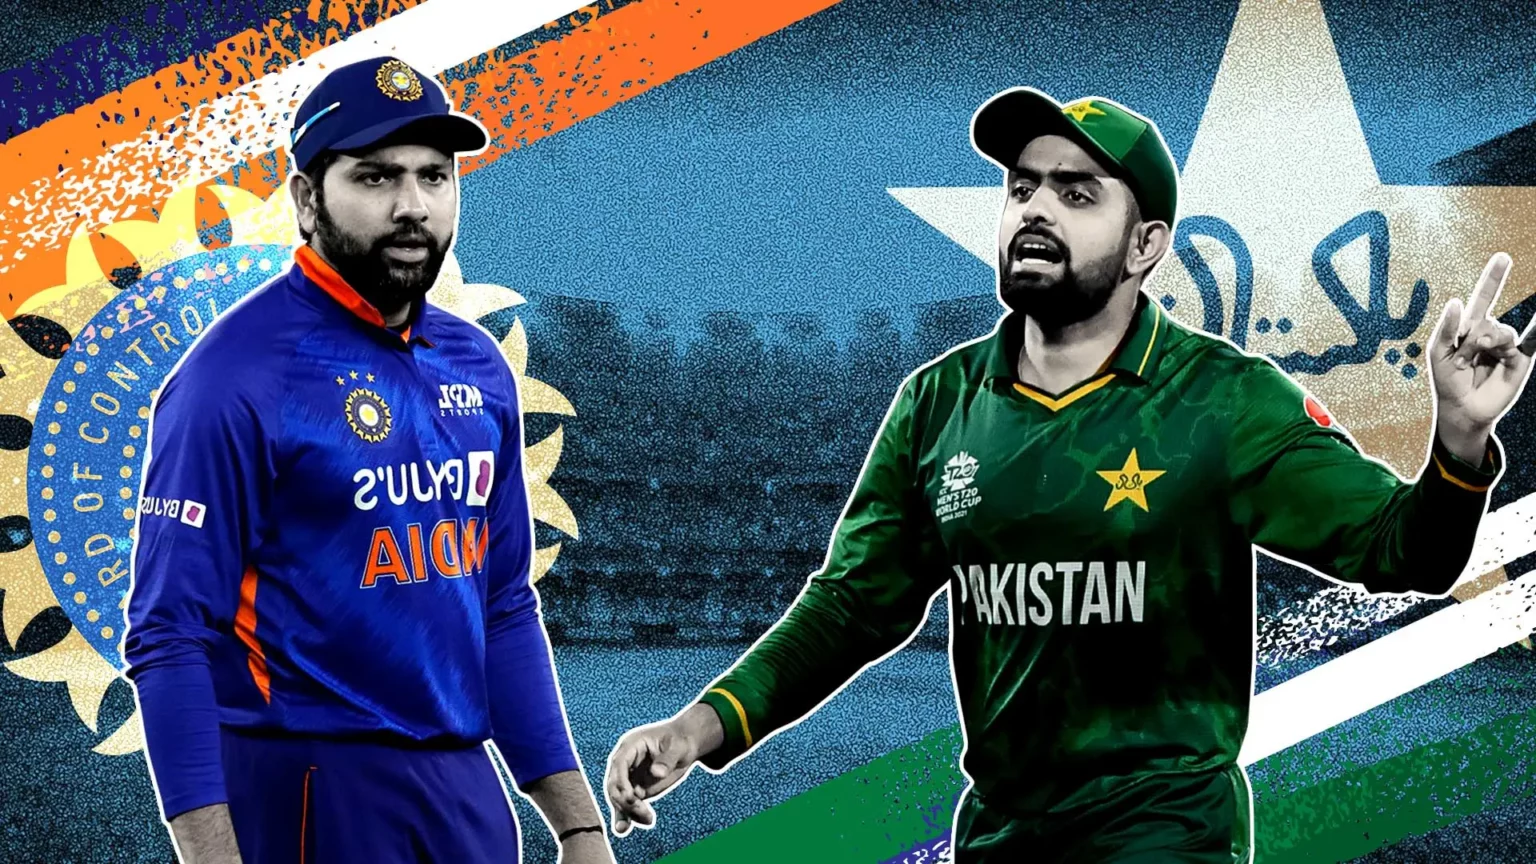 tickets-for-the-world-cup-match-between-india-and-pakistan-sold-out-within-an-hour-reports